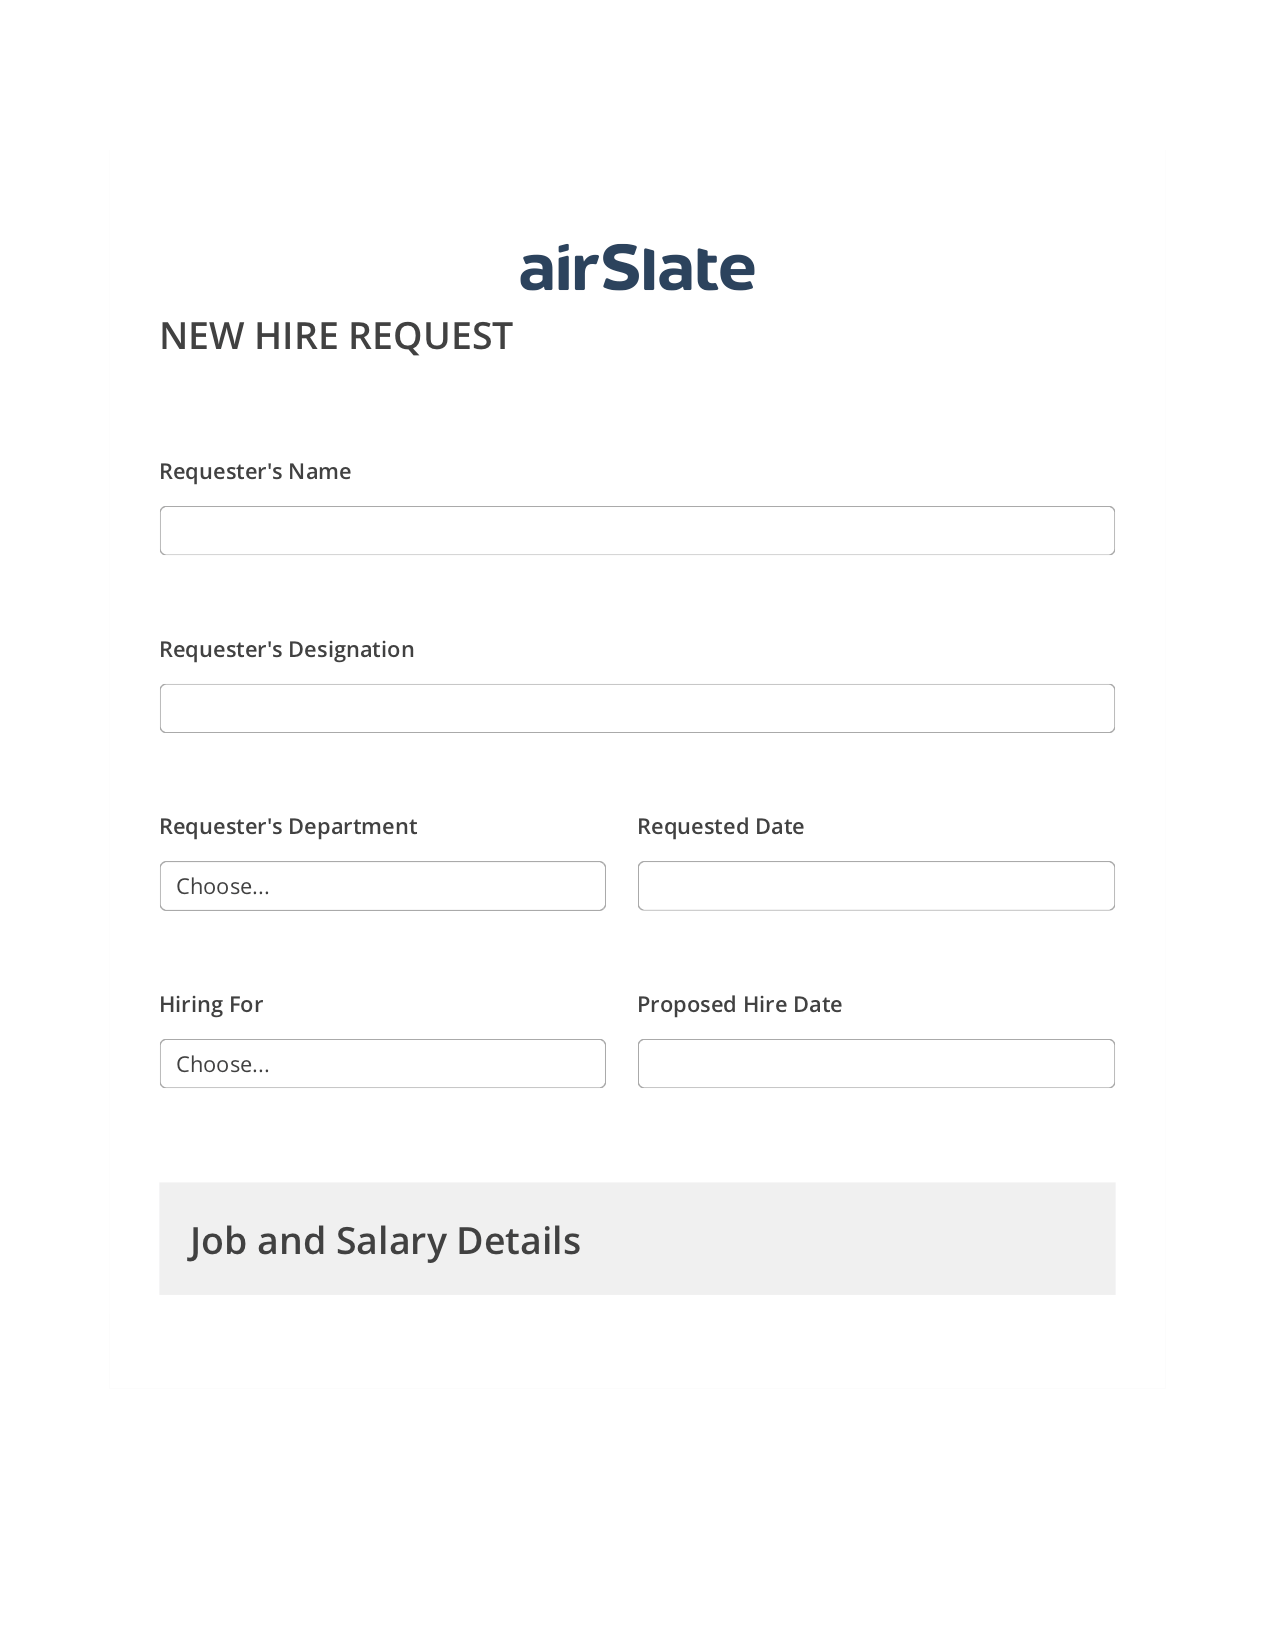 Hiring Request Workflow Prefill from NetSuite records, Remove Tags From Slate Bot, Archive to SharePoint Folder Bot